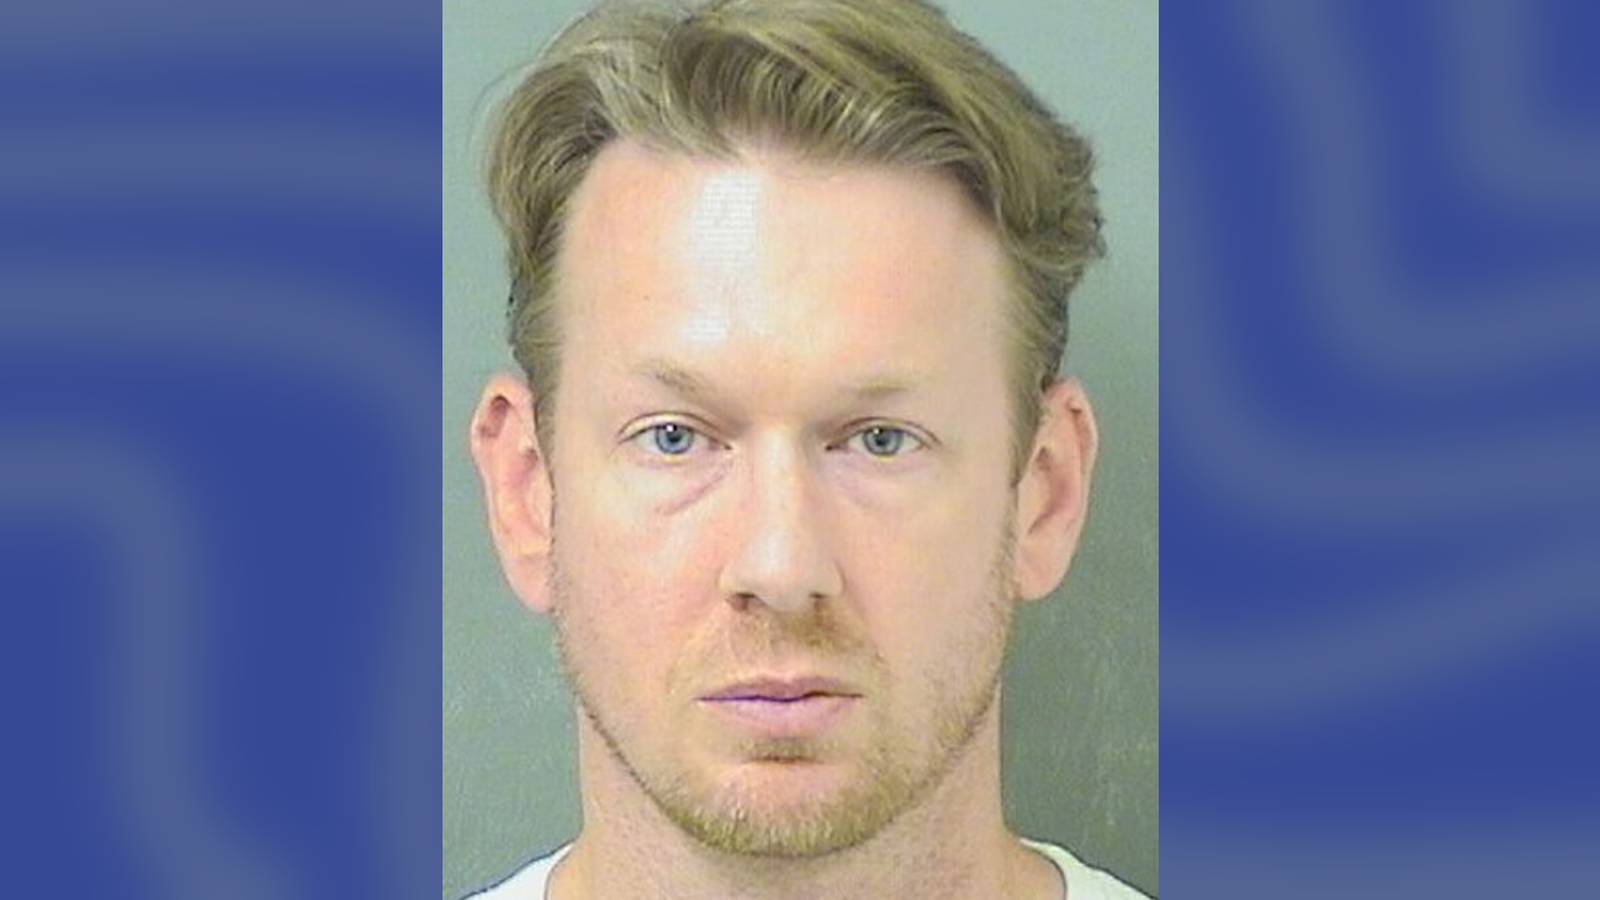 Florida Teacher Faces Charges After Allegedly Having Sex with an Underage Student in a Closet